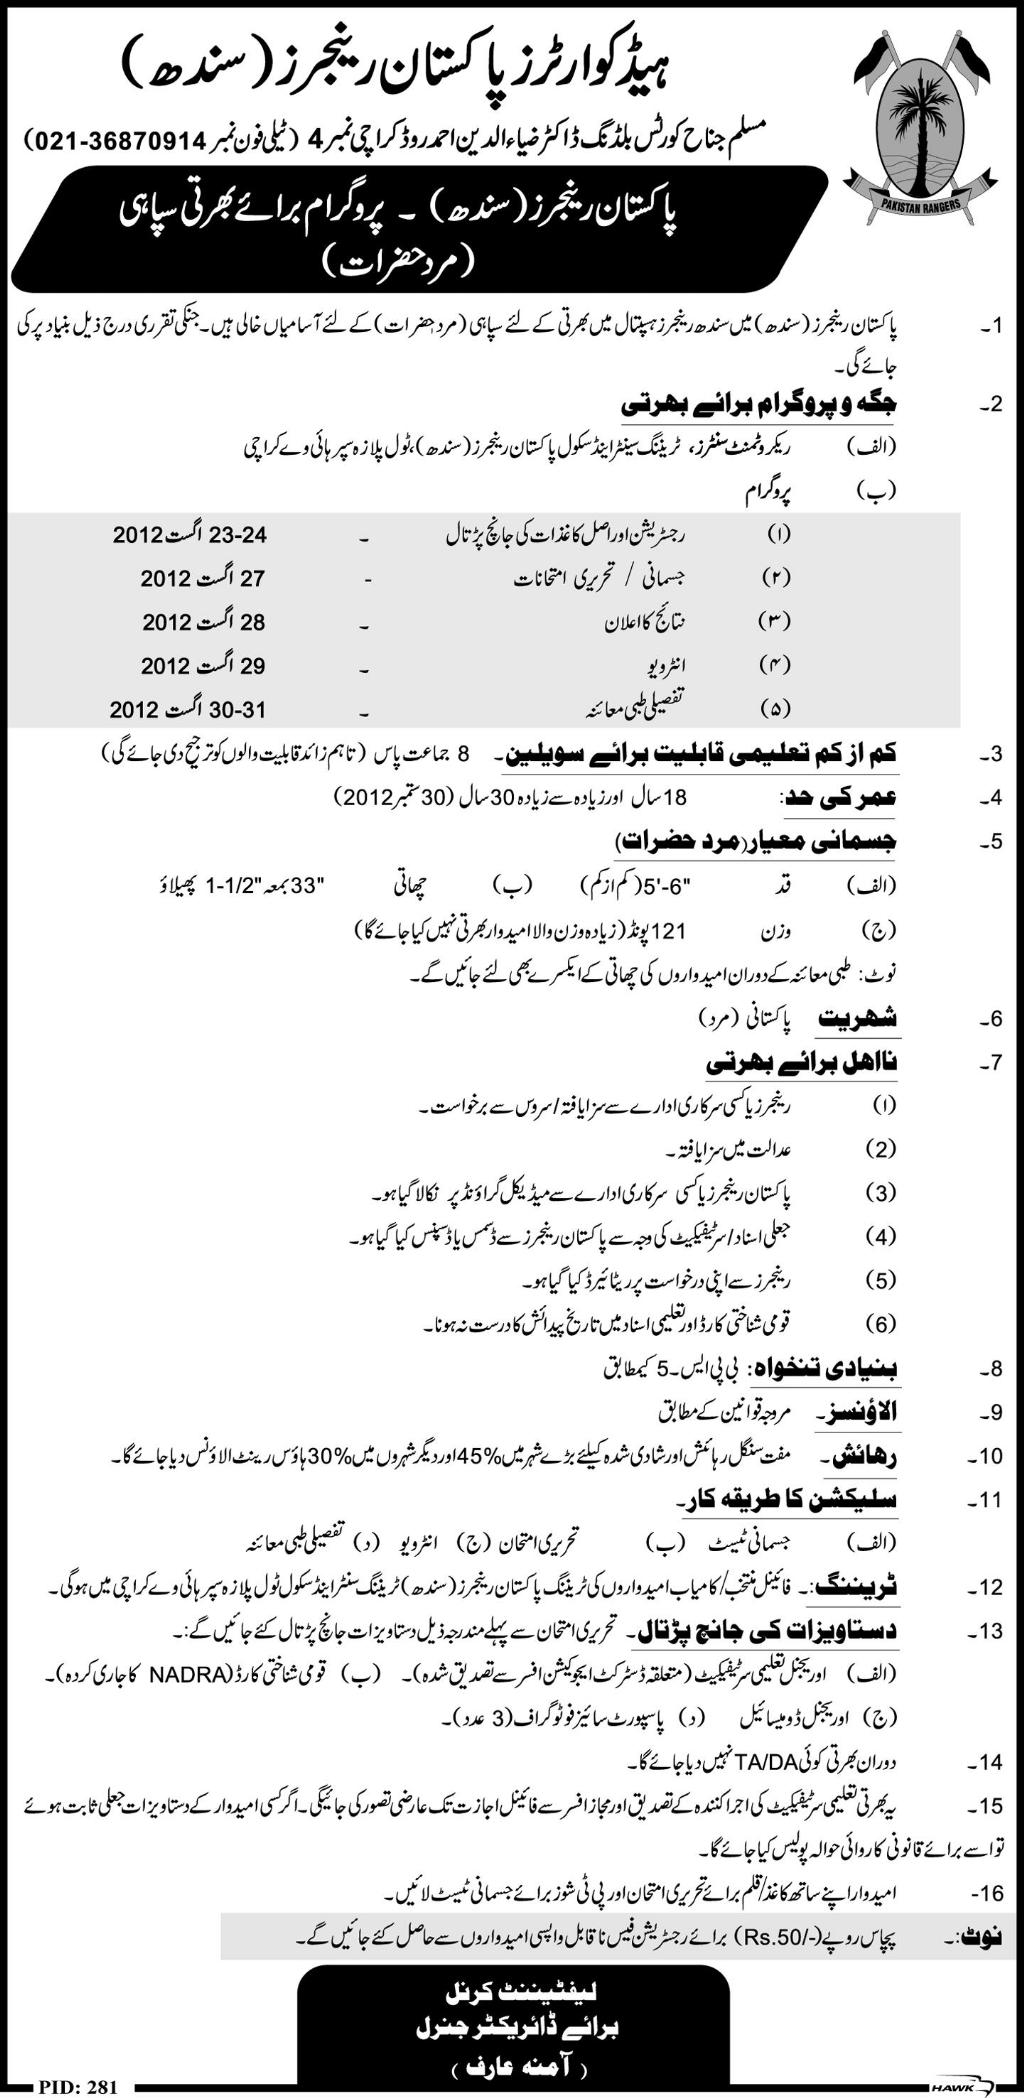 Join Pakistan Rangers Sindh as Constable (Government Job)